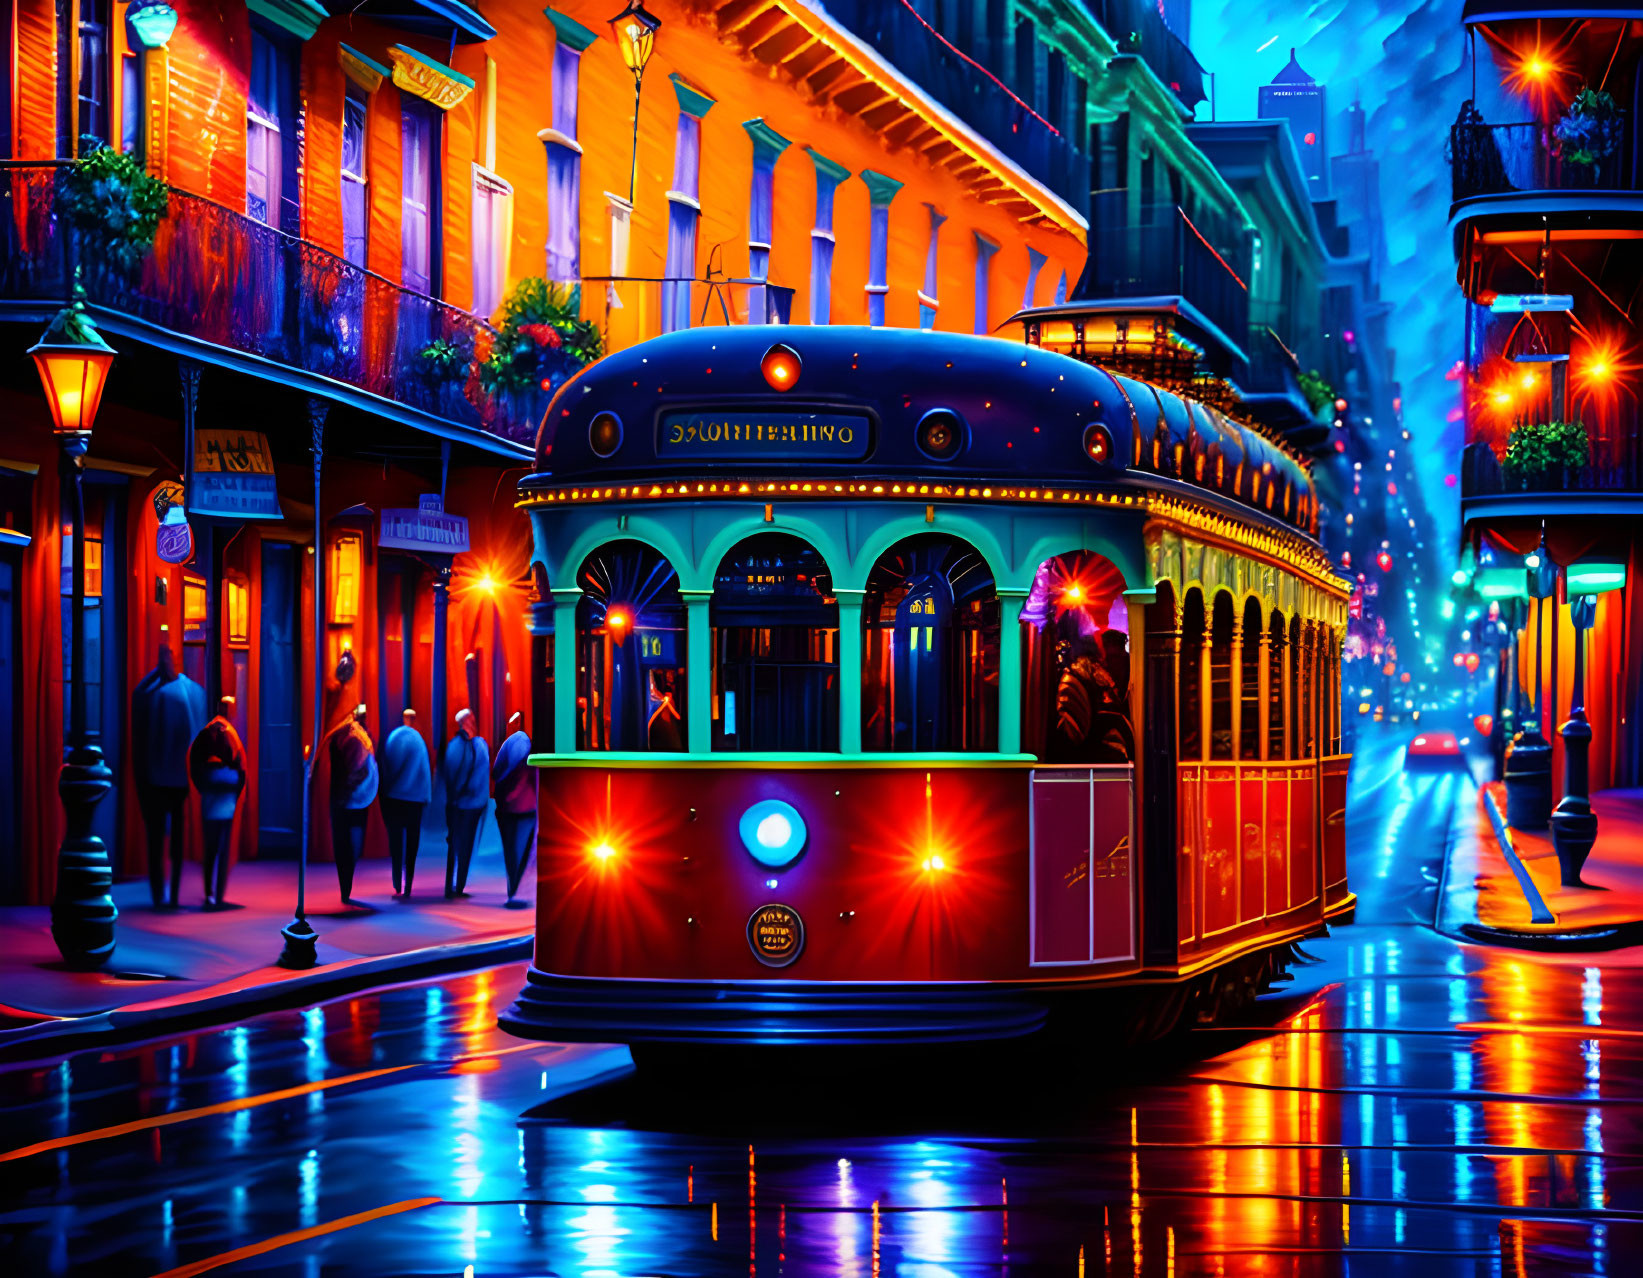 Night street scene with red streetcar, illuminated buildings, and glowing street lamps.